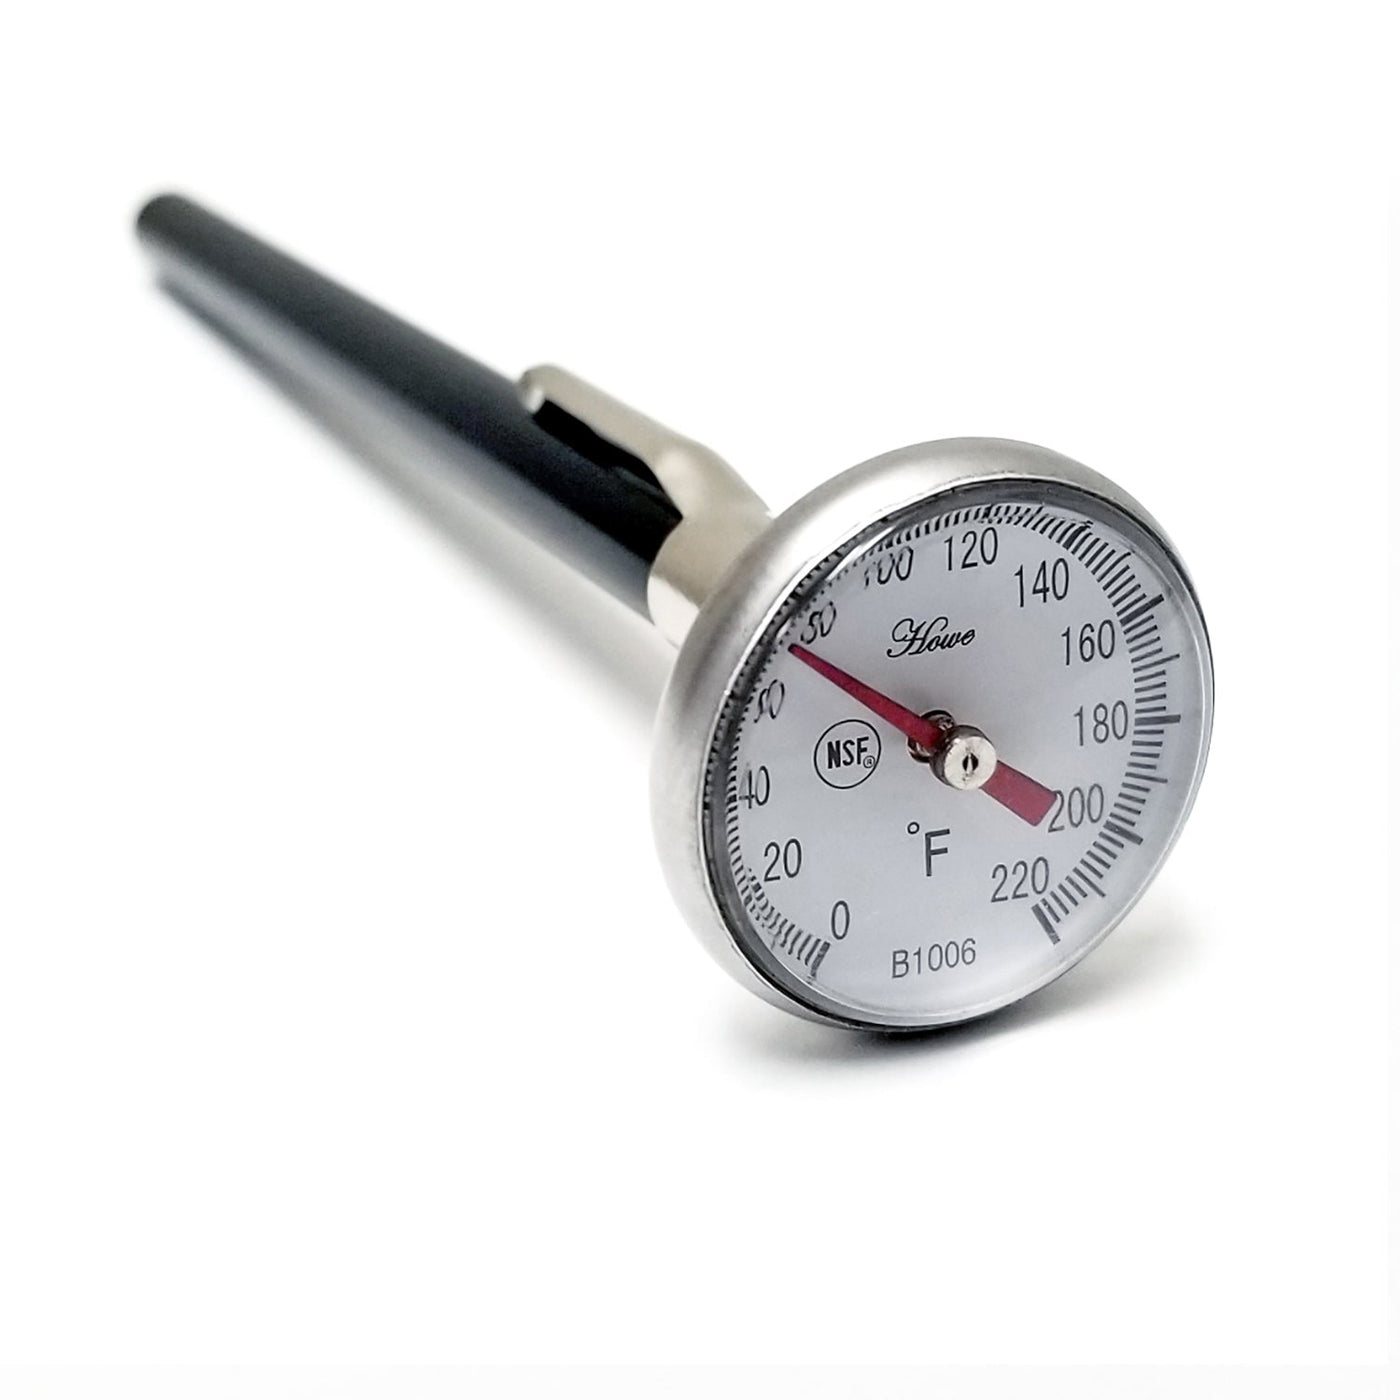 Types of Food Thermometers for Your Kitchen